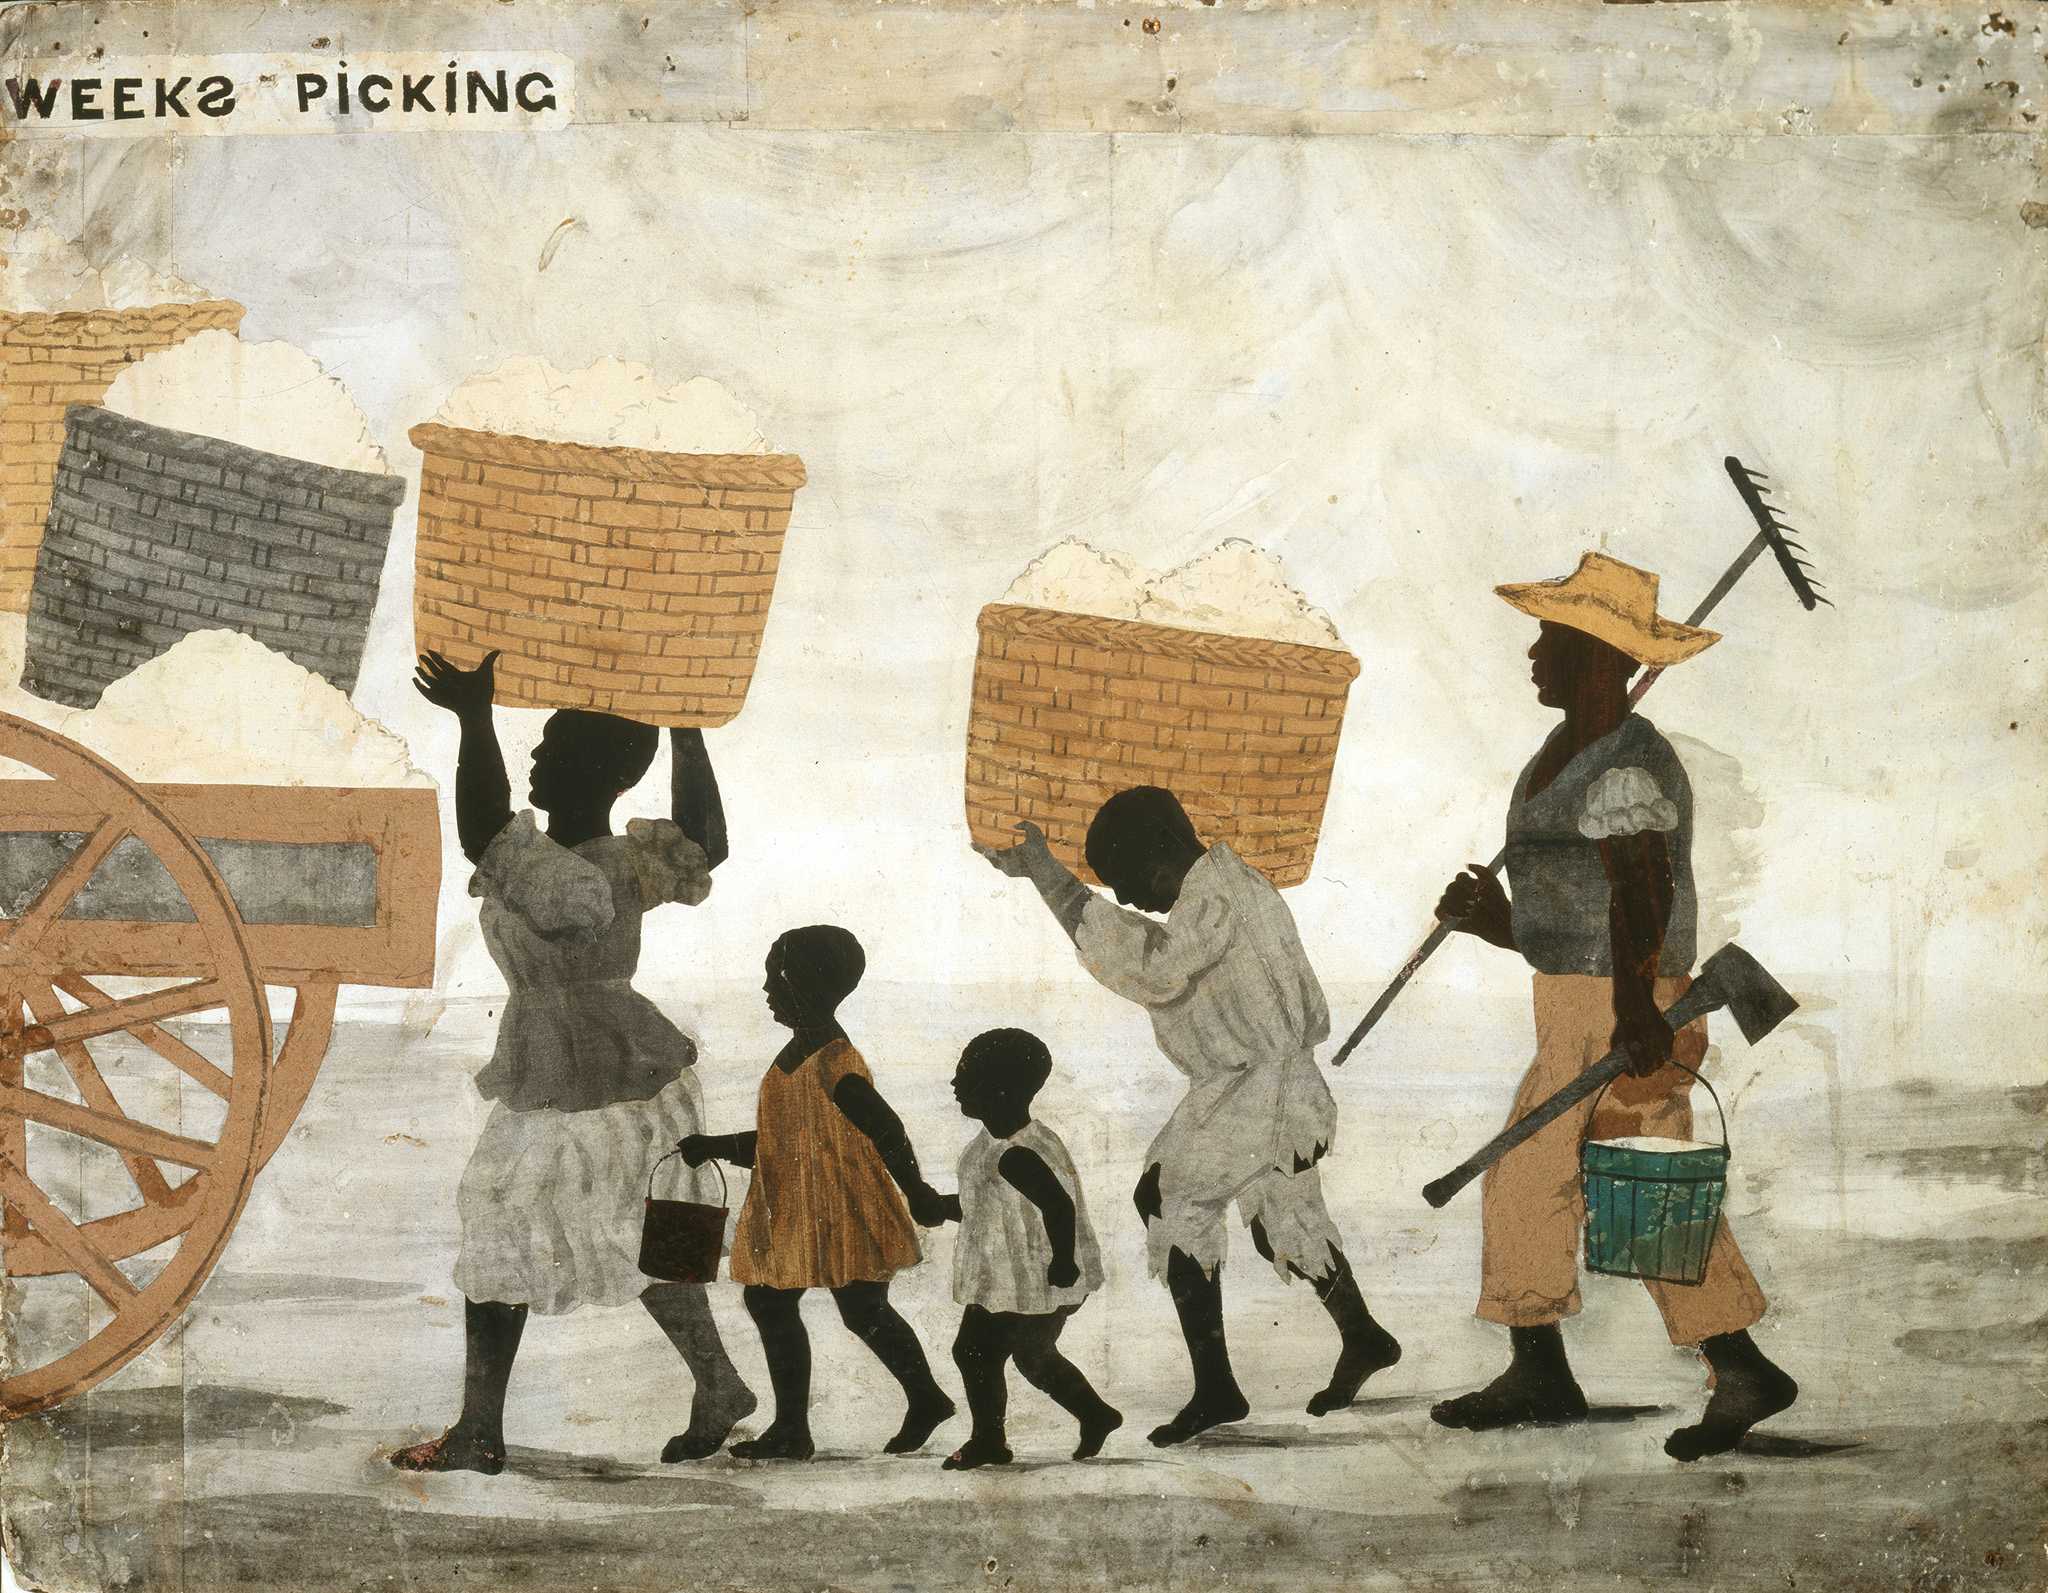 Illustration of people carrying cotton and tools while wearing cotton garmets